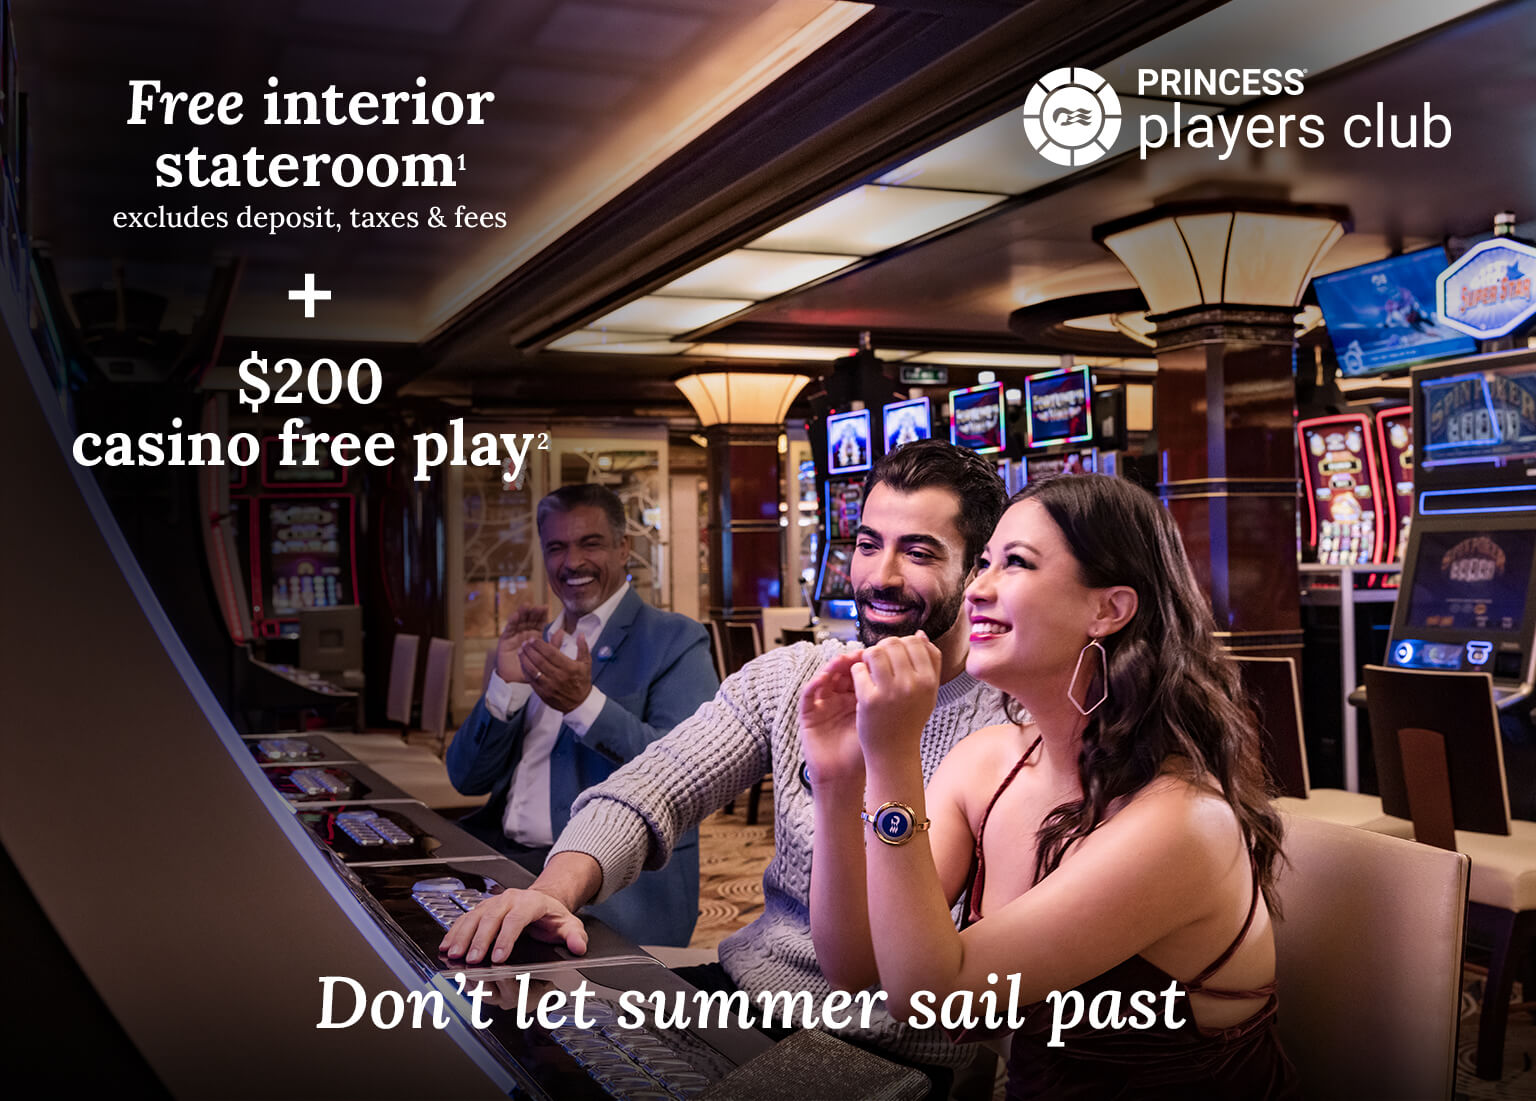 Free interior stateroom + $200 casino free play. Click here to book.